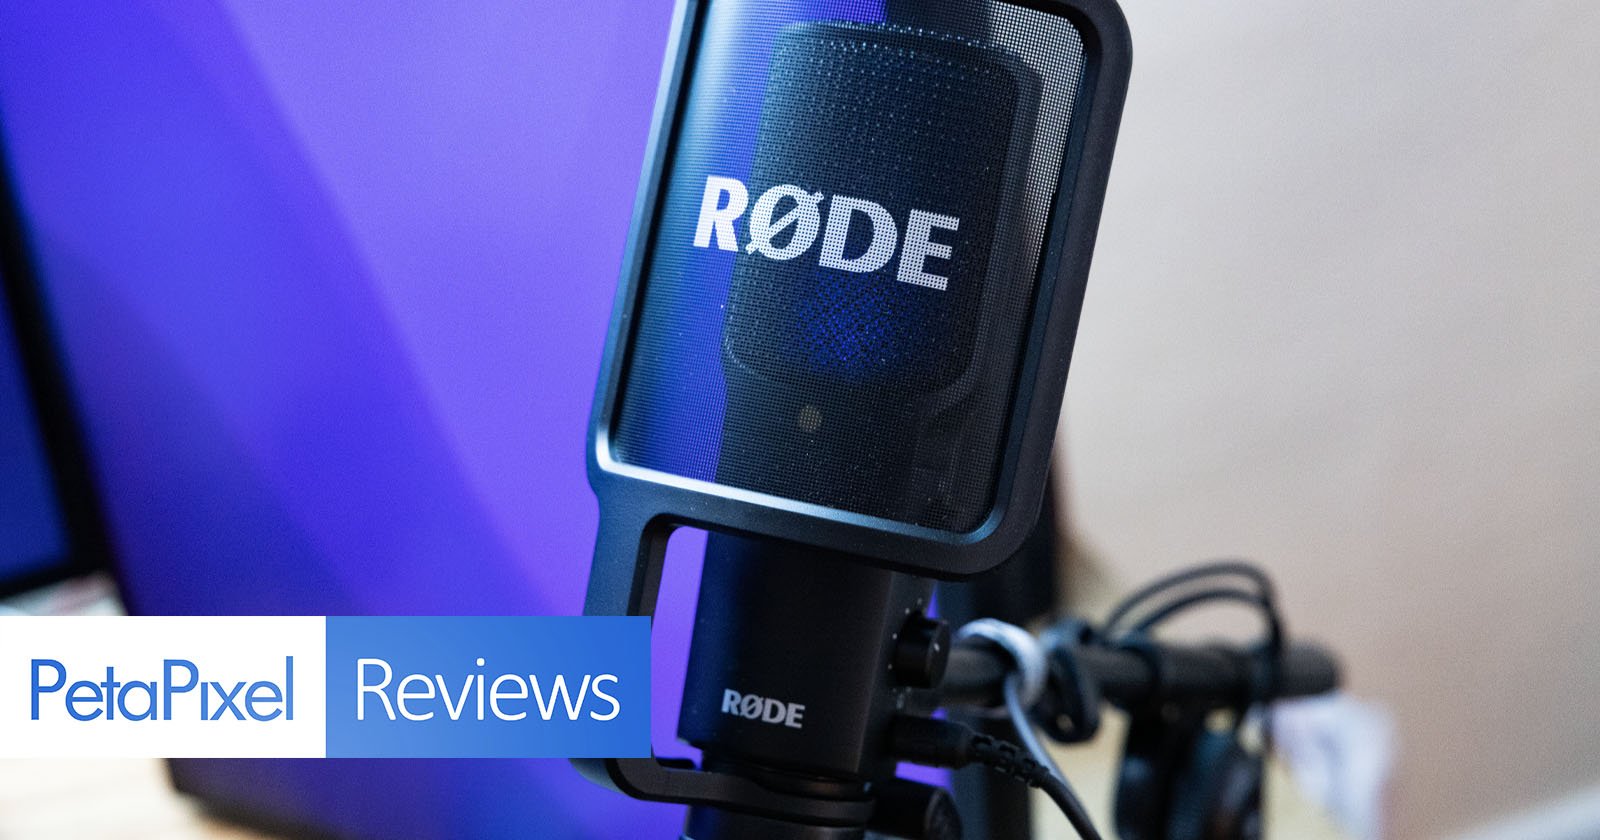 RODE NT-USB+ Studio Microphone Review: Good Gets Even Better